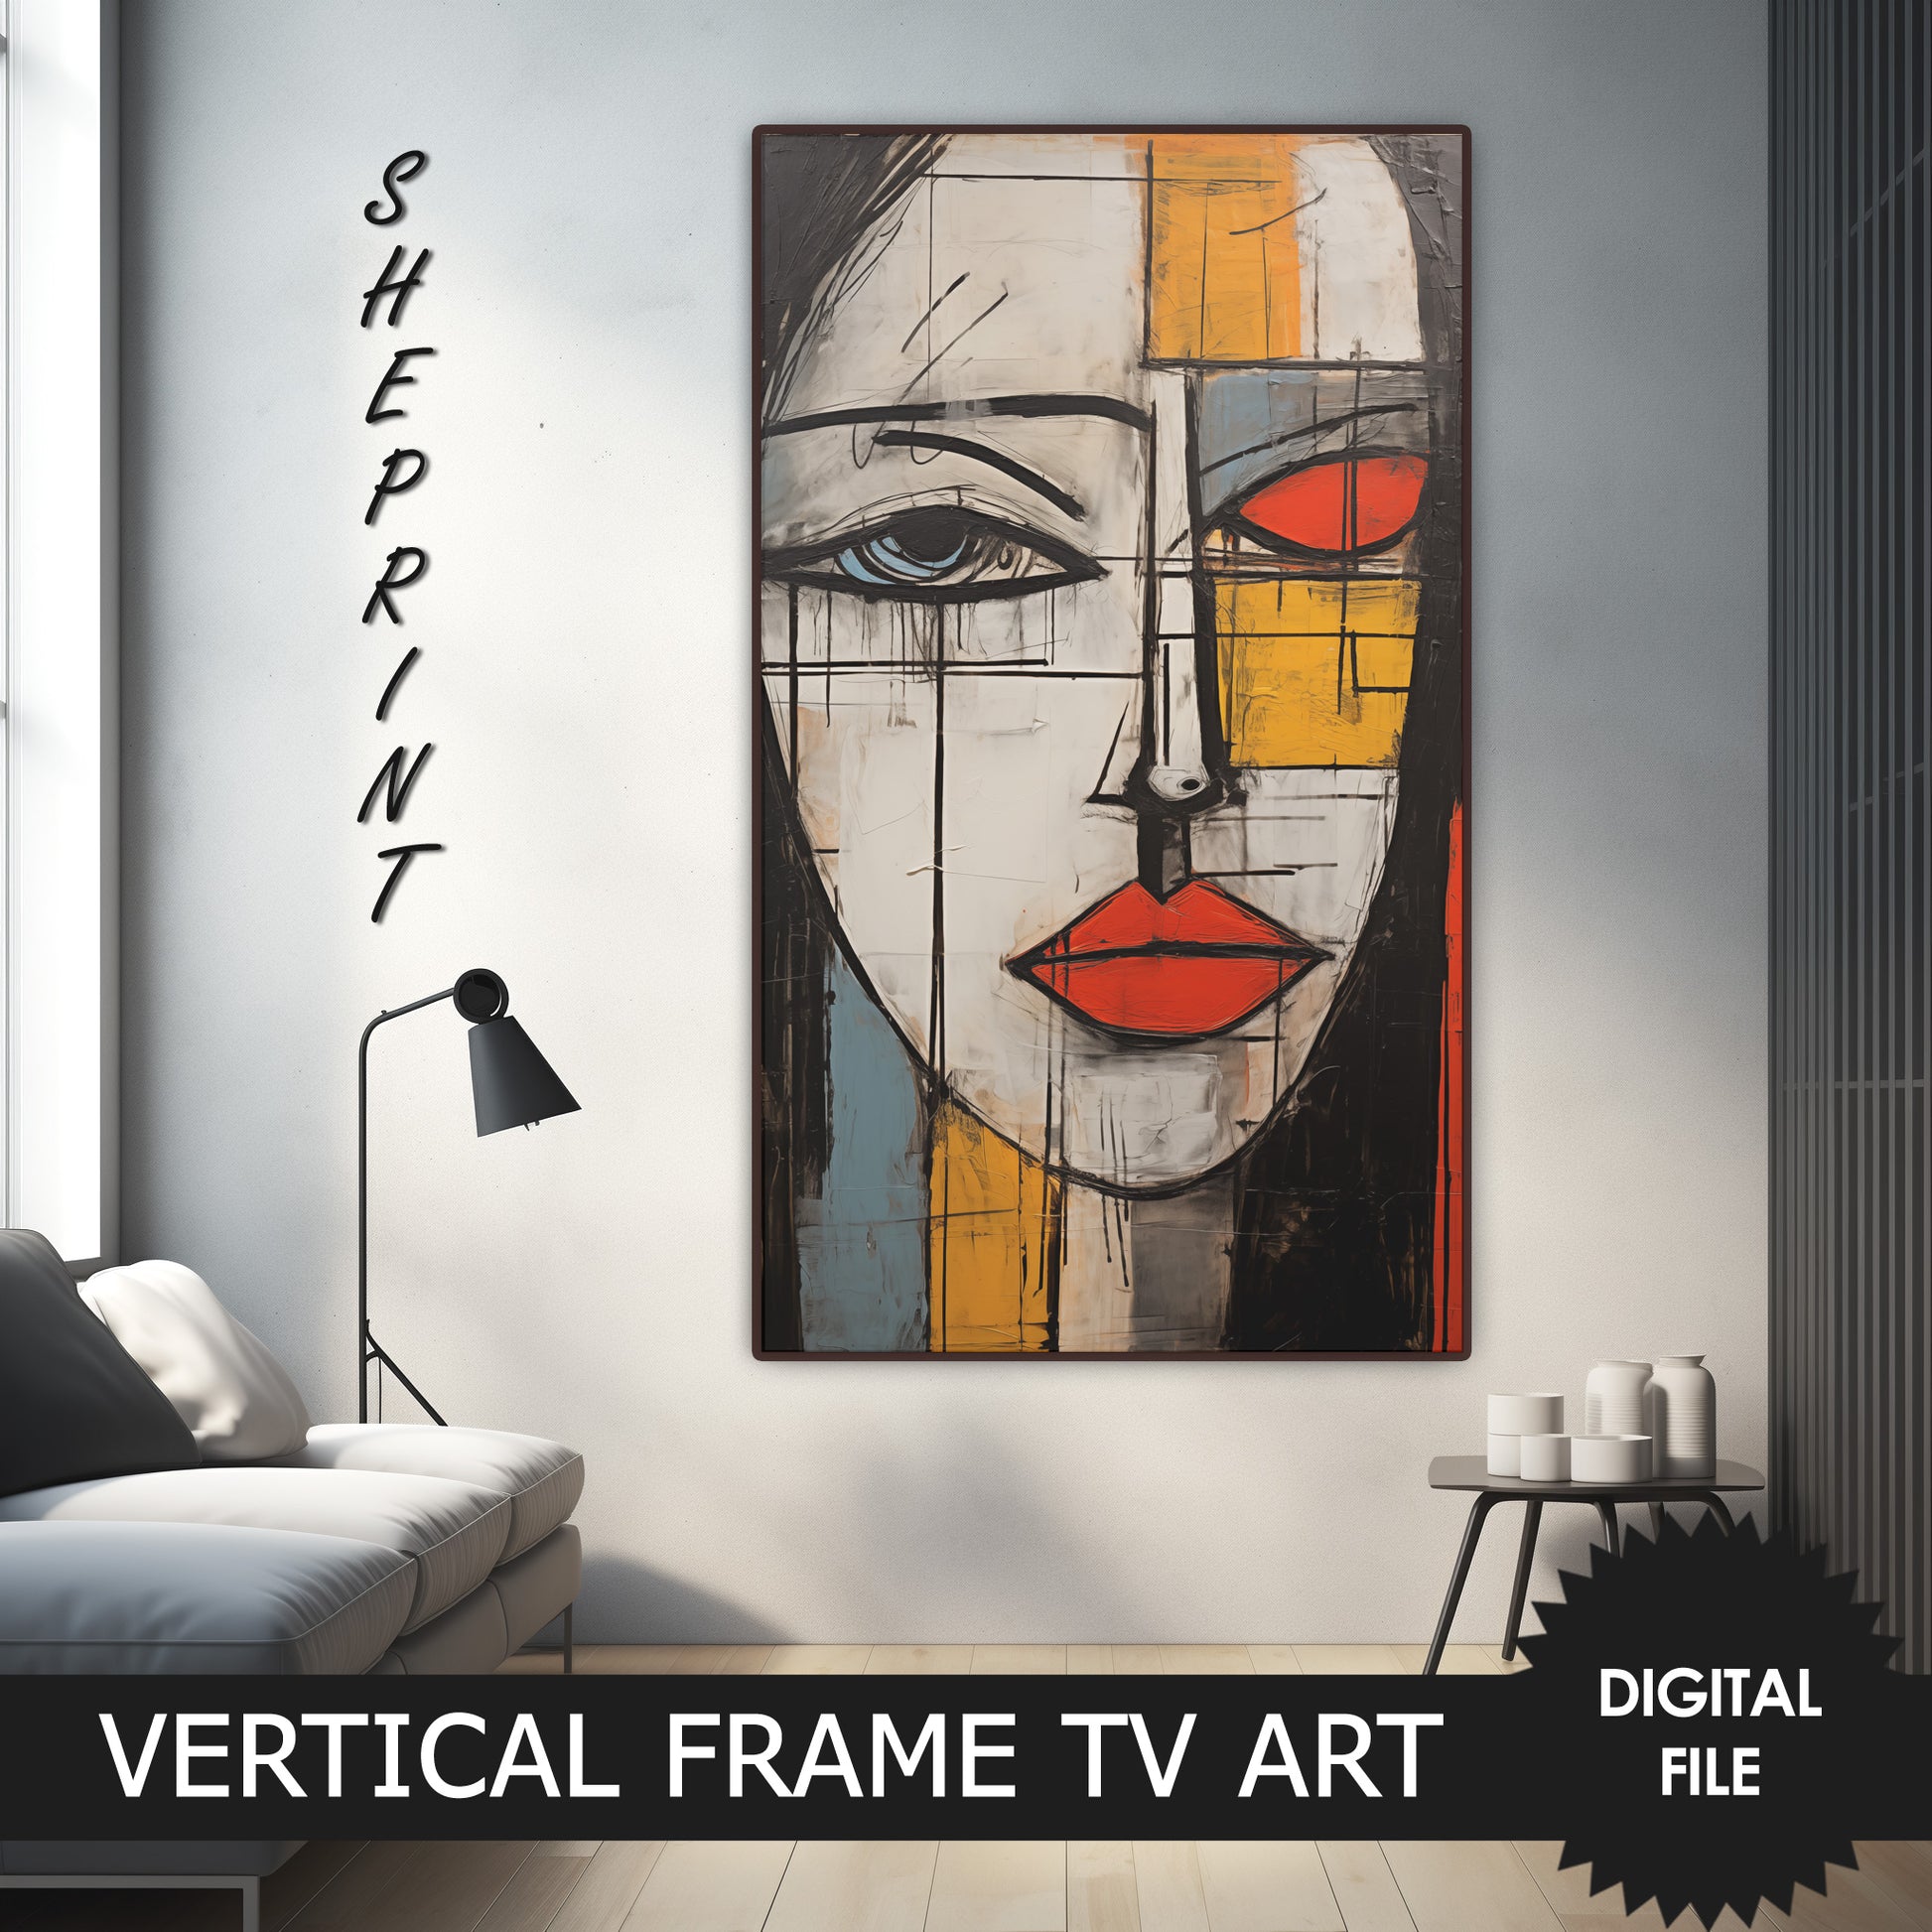 Vertical Frame TV Art, Beautiful Face Abstract Art, Oil Painting preview on Samsung Frame TV when mounted vertically